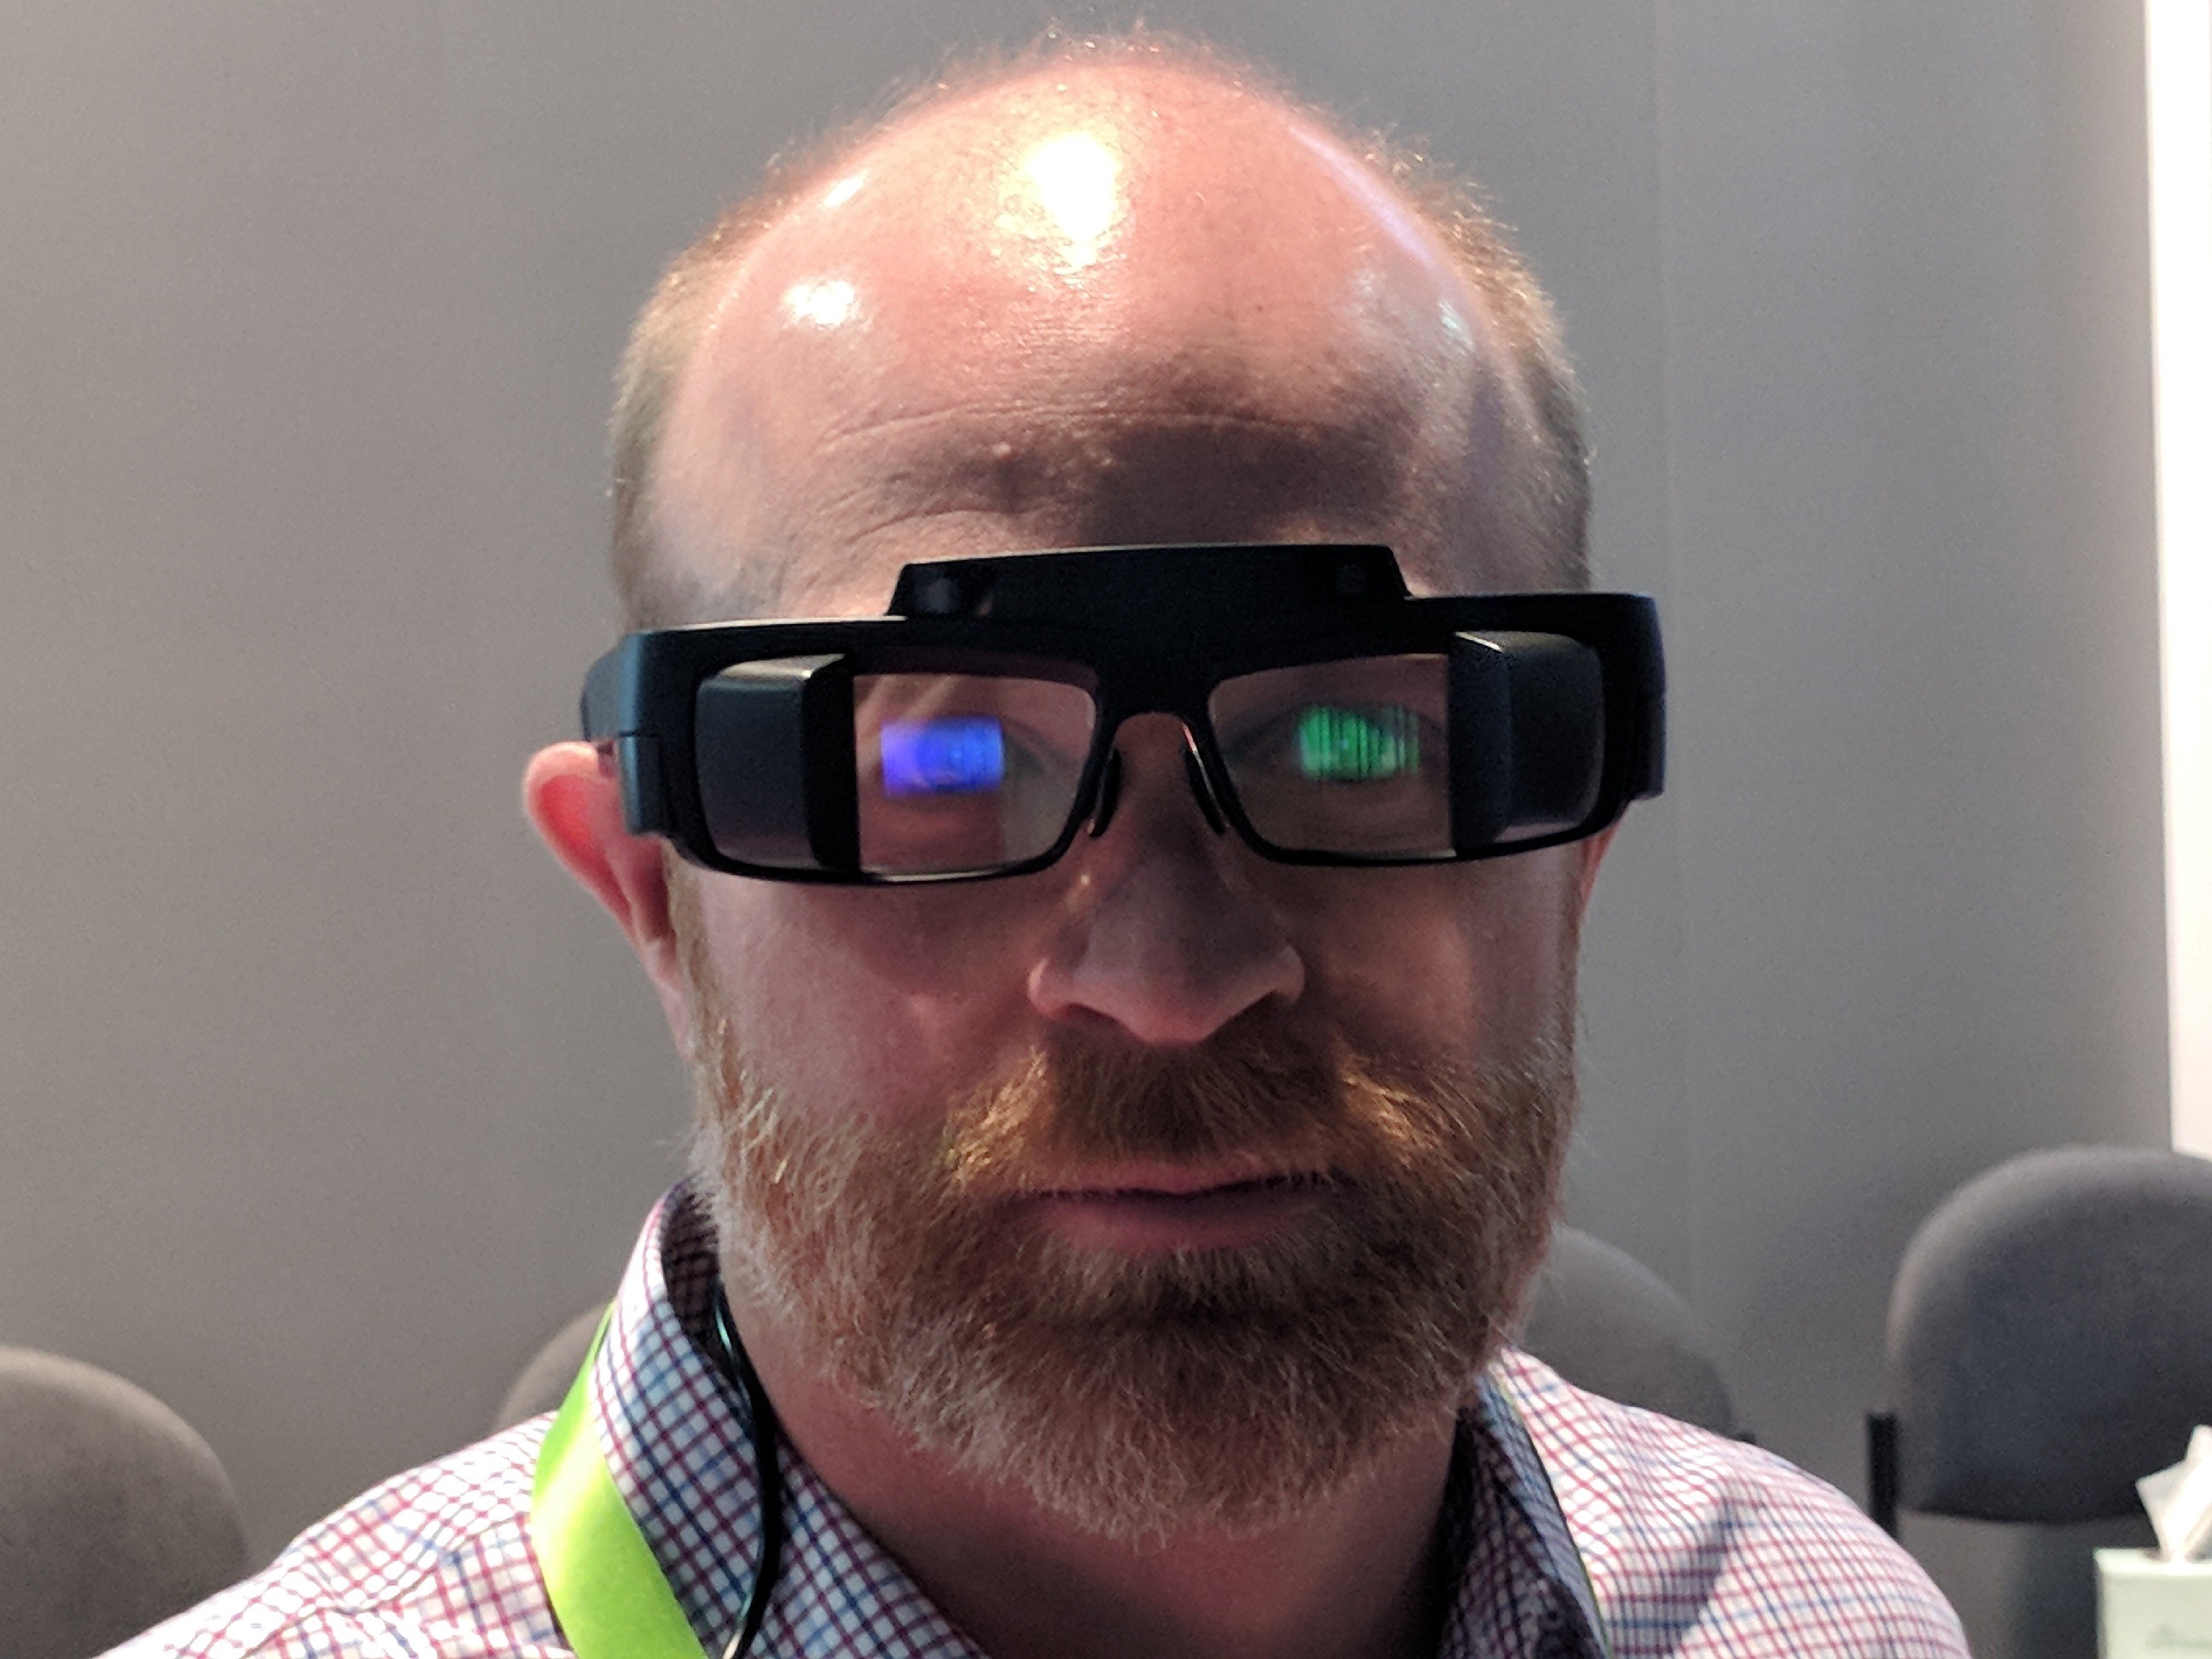 A man wearing augmented reality glasses with transparent displays